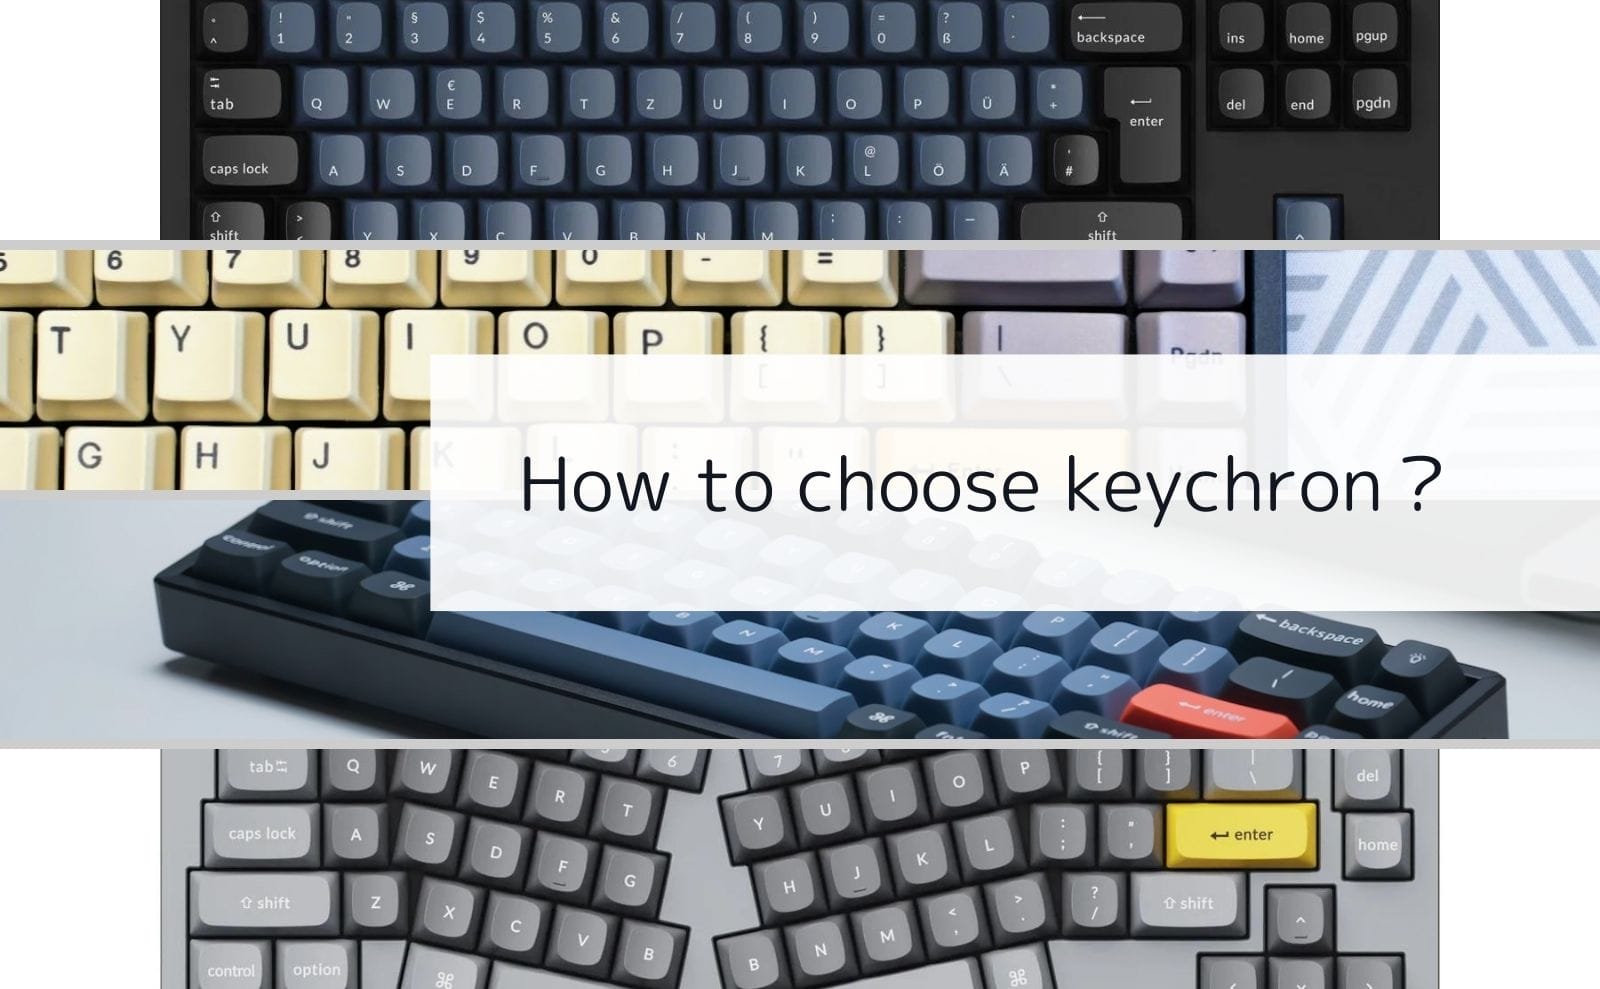 How to choose keychron